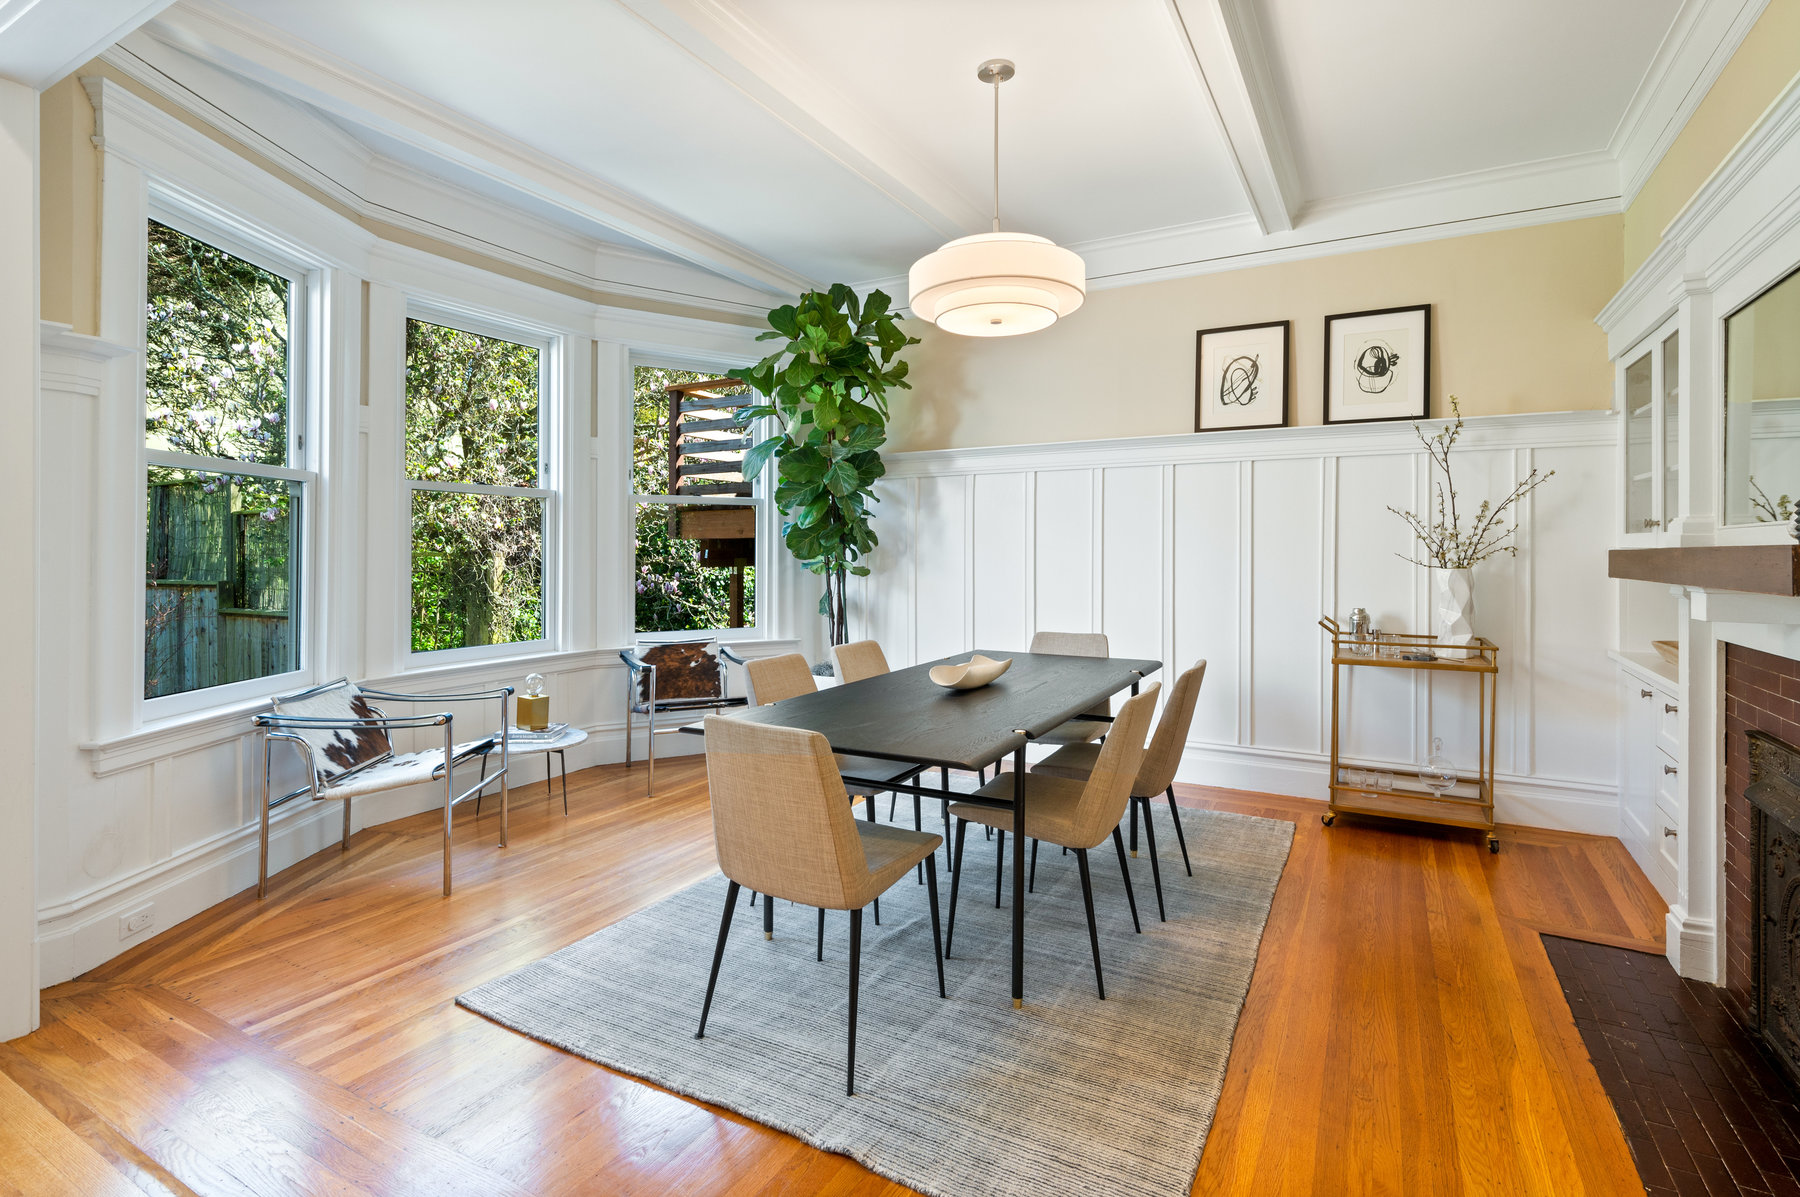 Property Photo: Dining room. Beautiful wood detailing, bay windows looking out to backyard. 